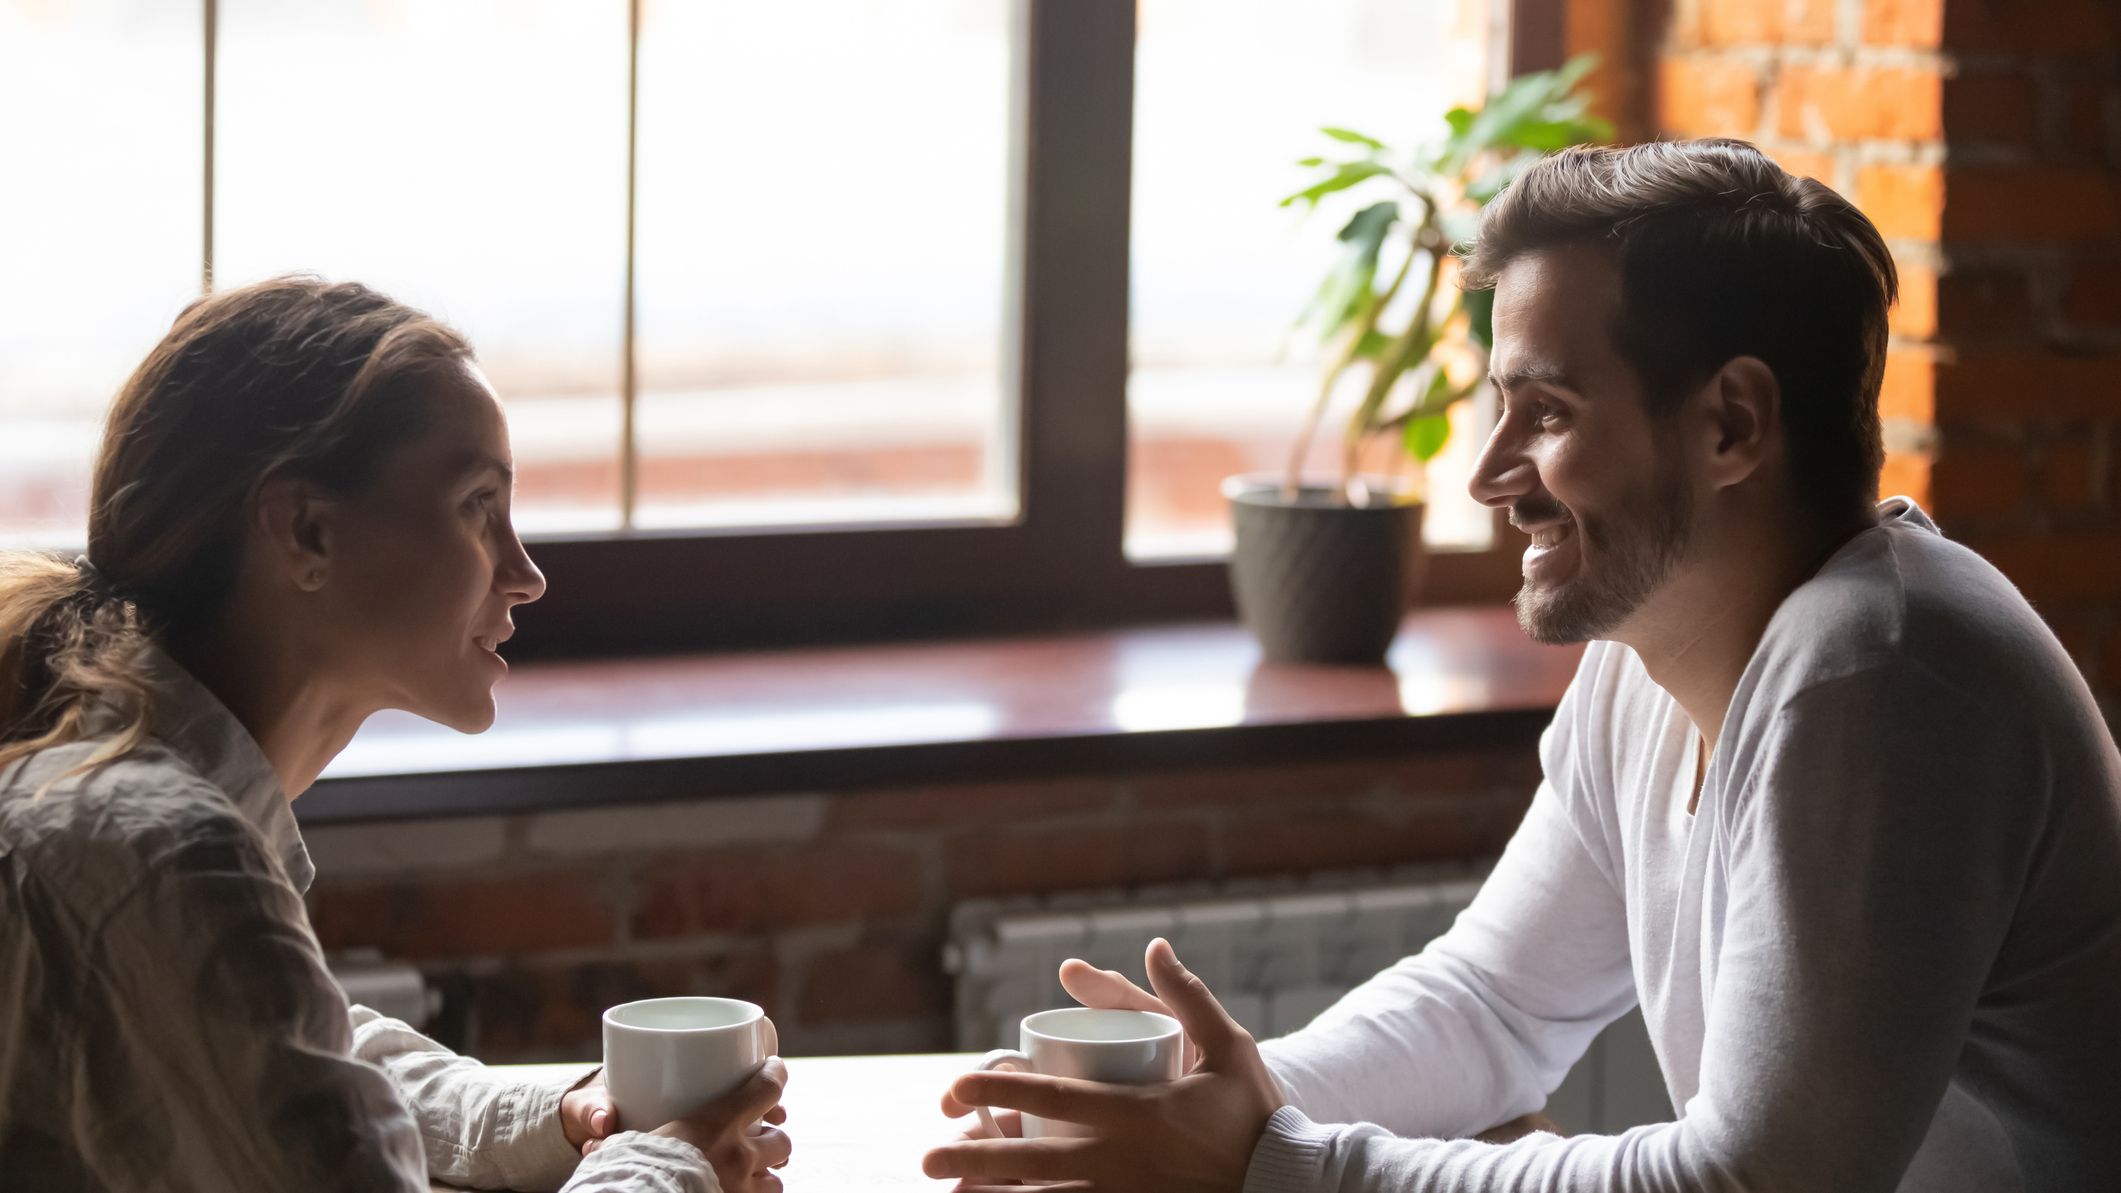 Bookmark.ie. Together: A First Conversation About Love